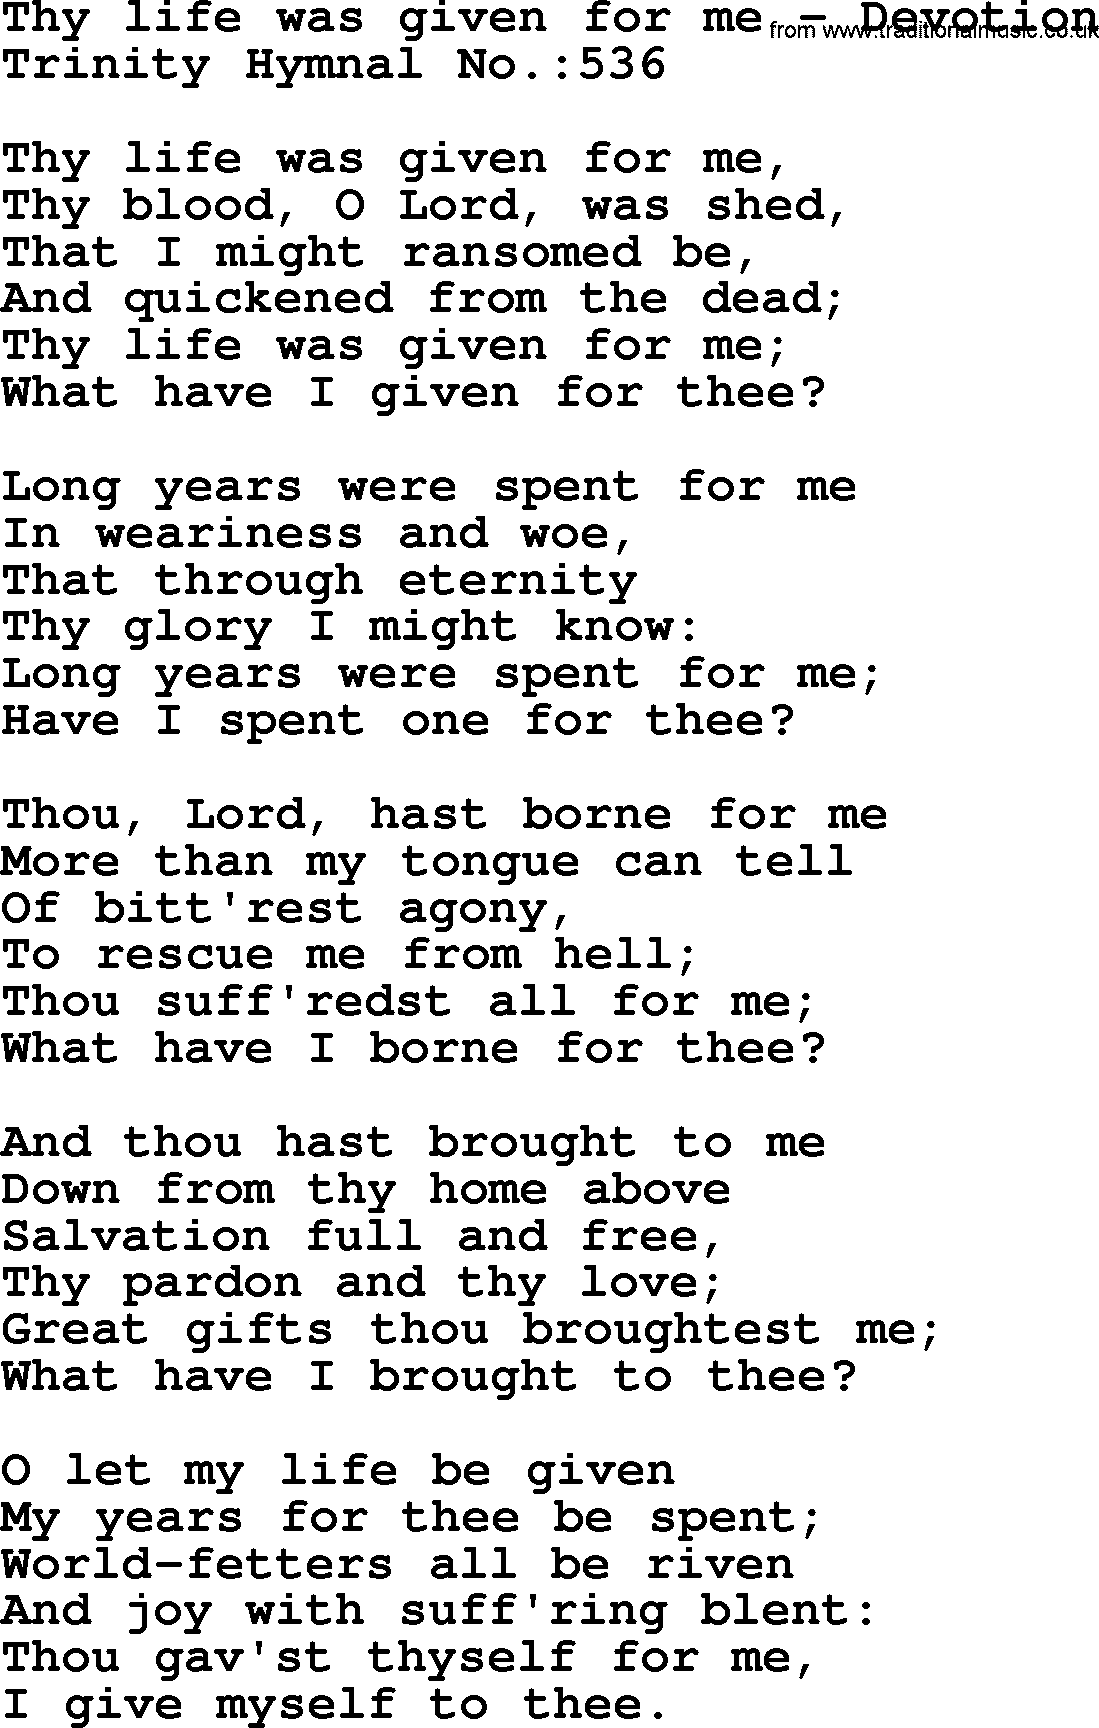 Trinity Hymnal Hymn: Thy Life Was Given For Me--Devotion, lyrics with midi music